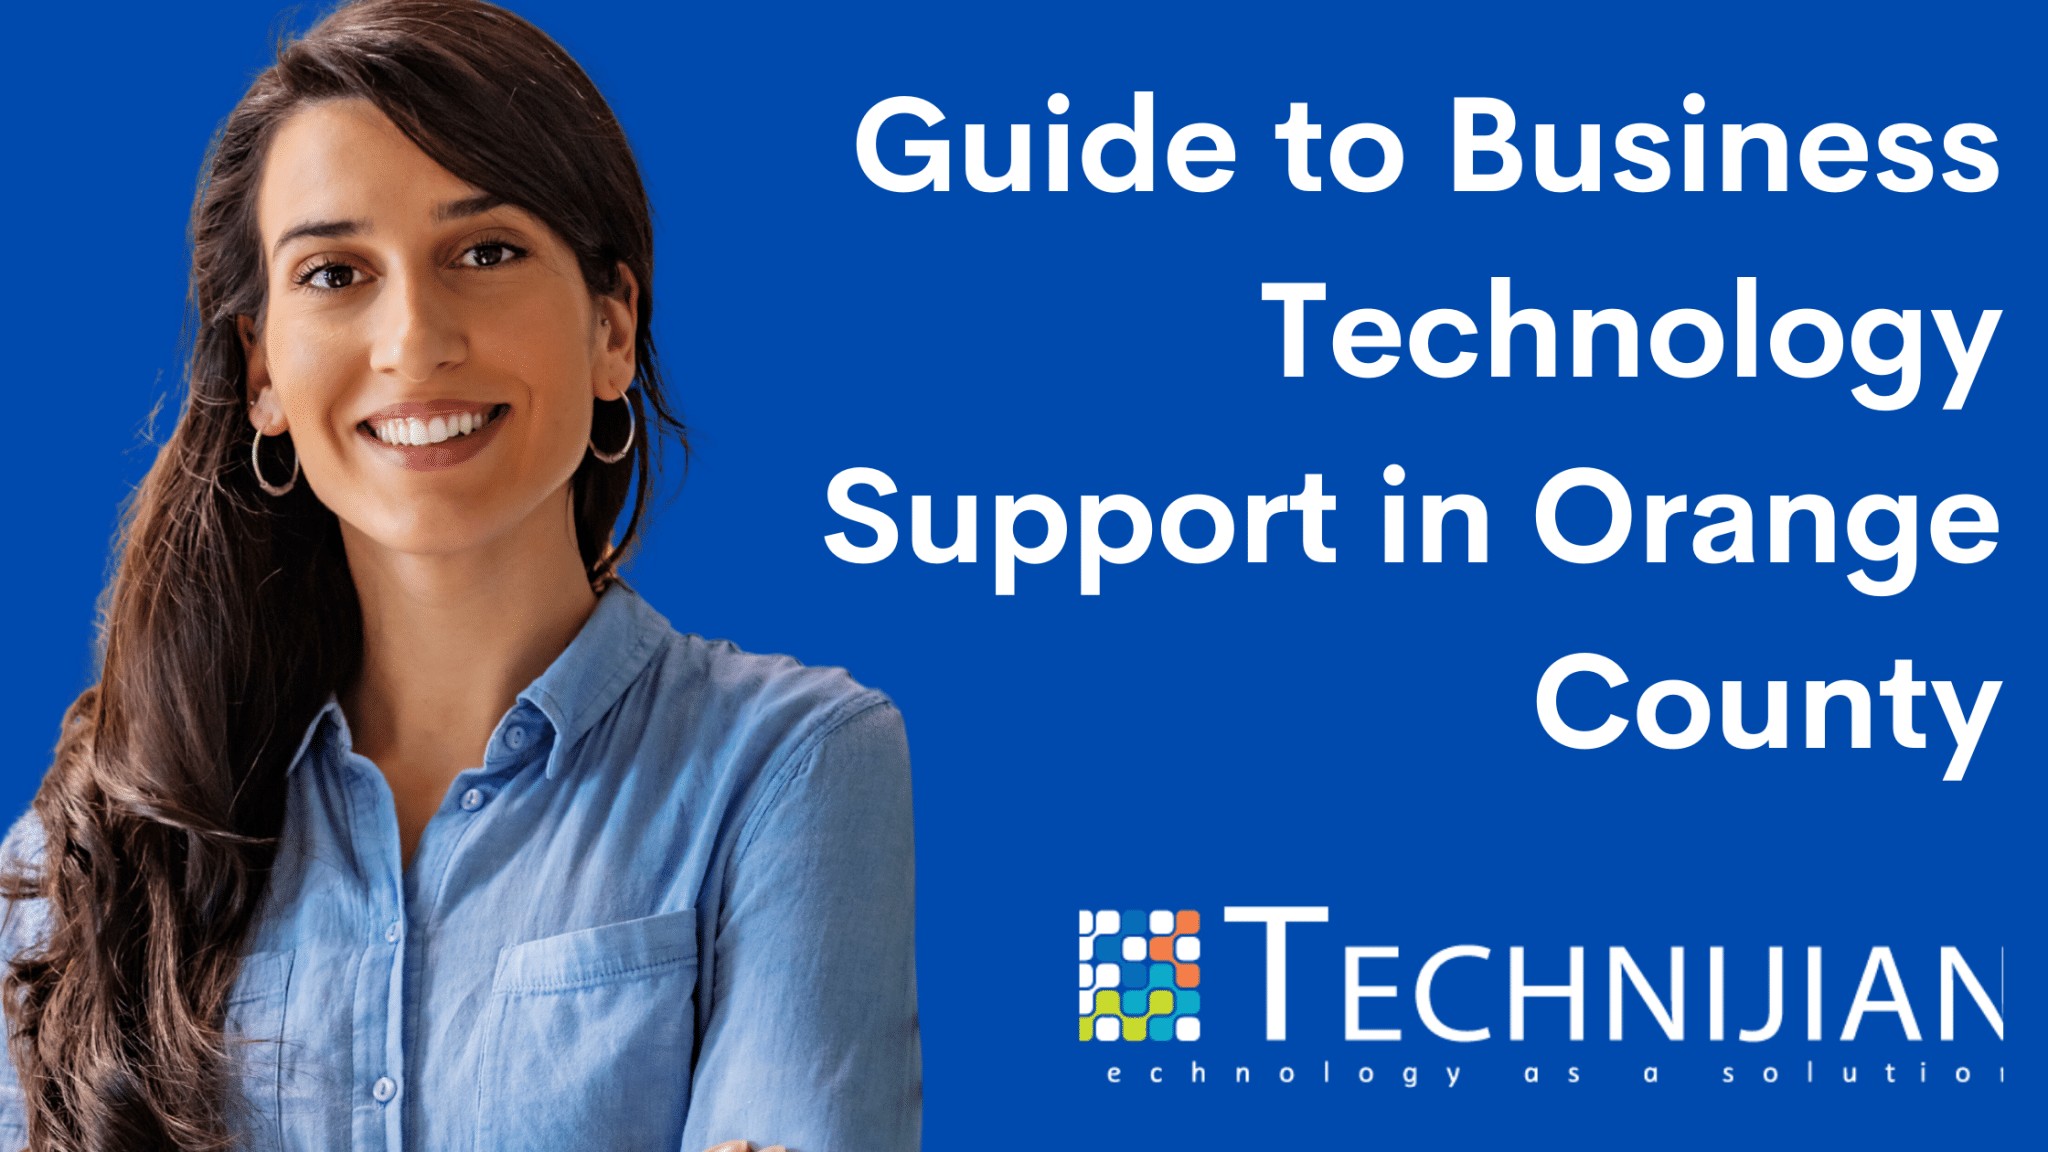 Guide to Business Technology Support in Orange County